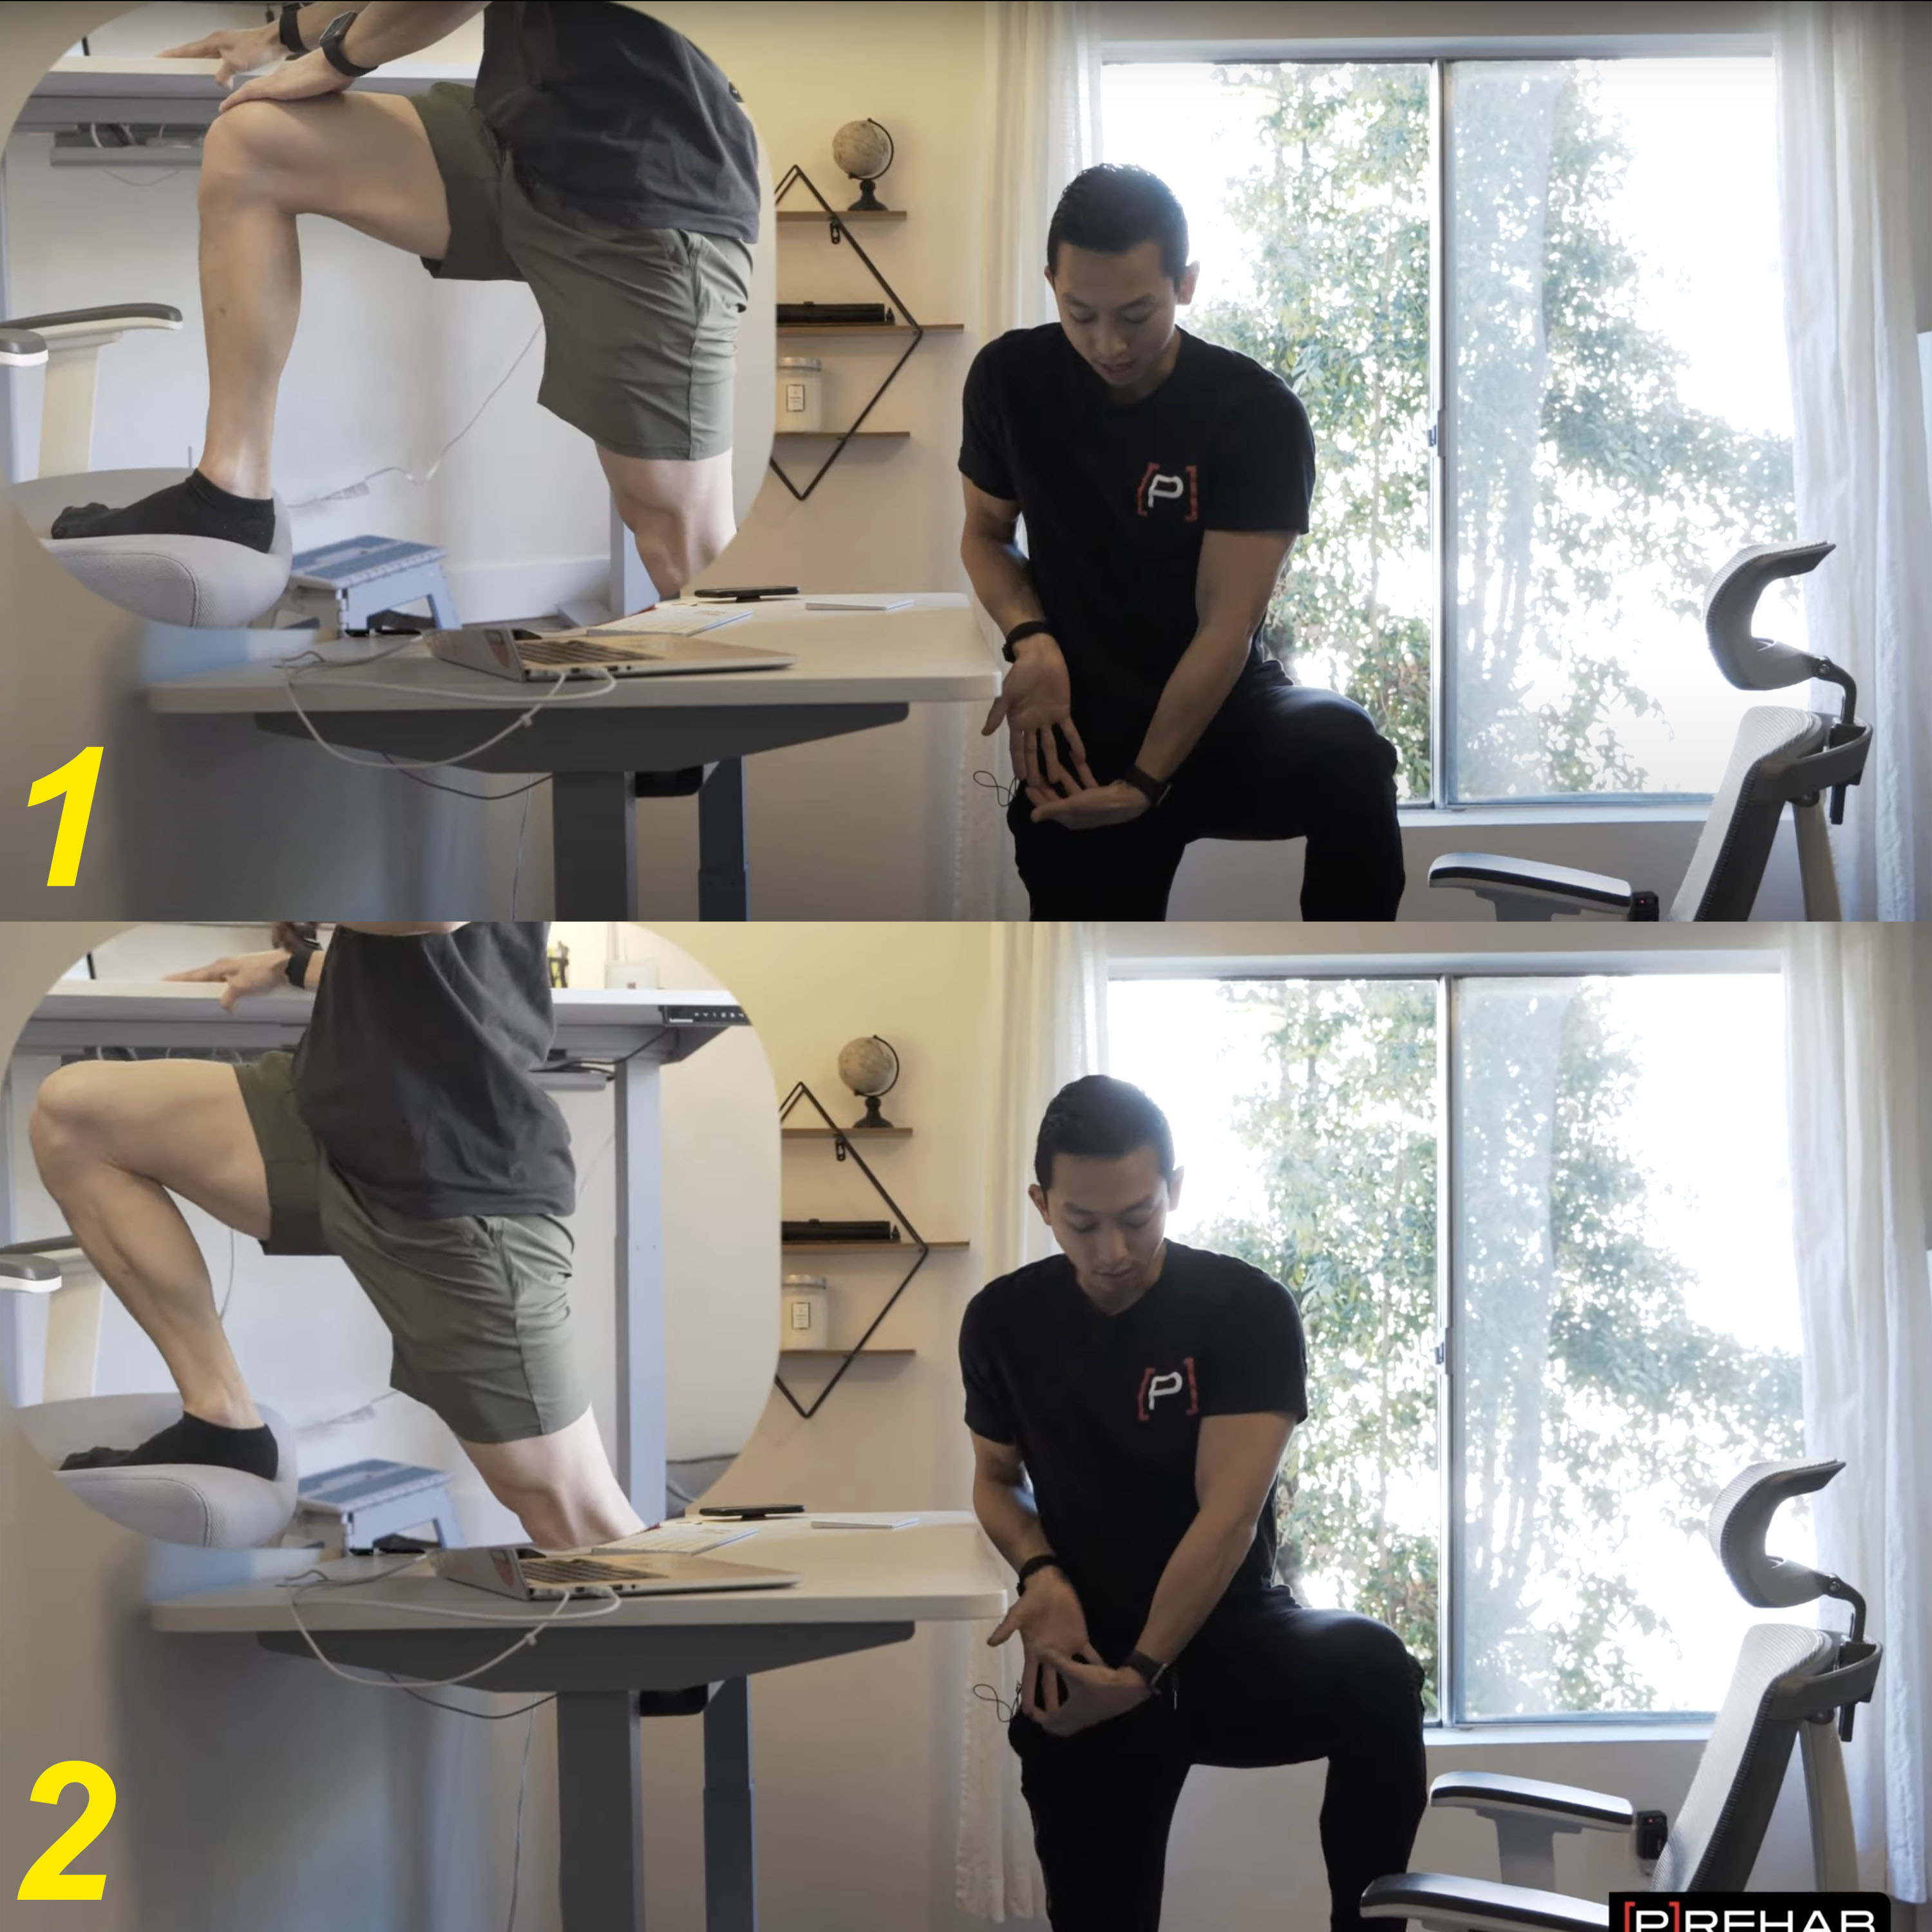 Dr. Michael Lau demonstrates a hip flexor stretch at his work-from-home desk